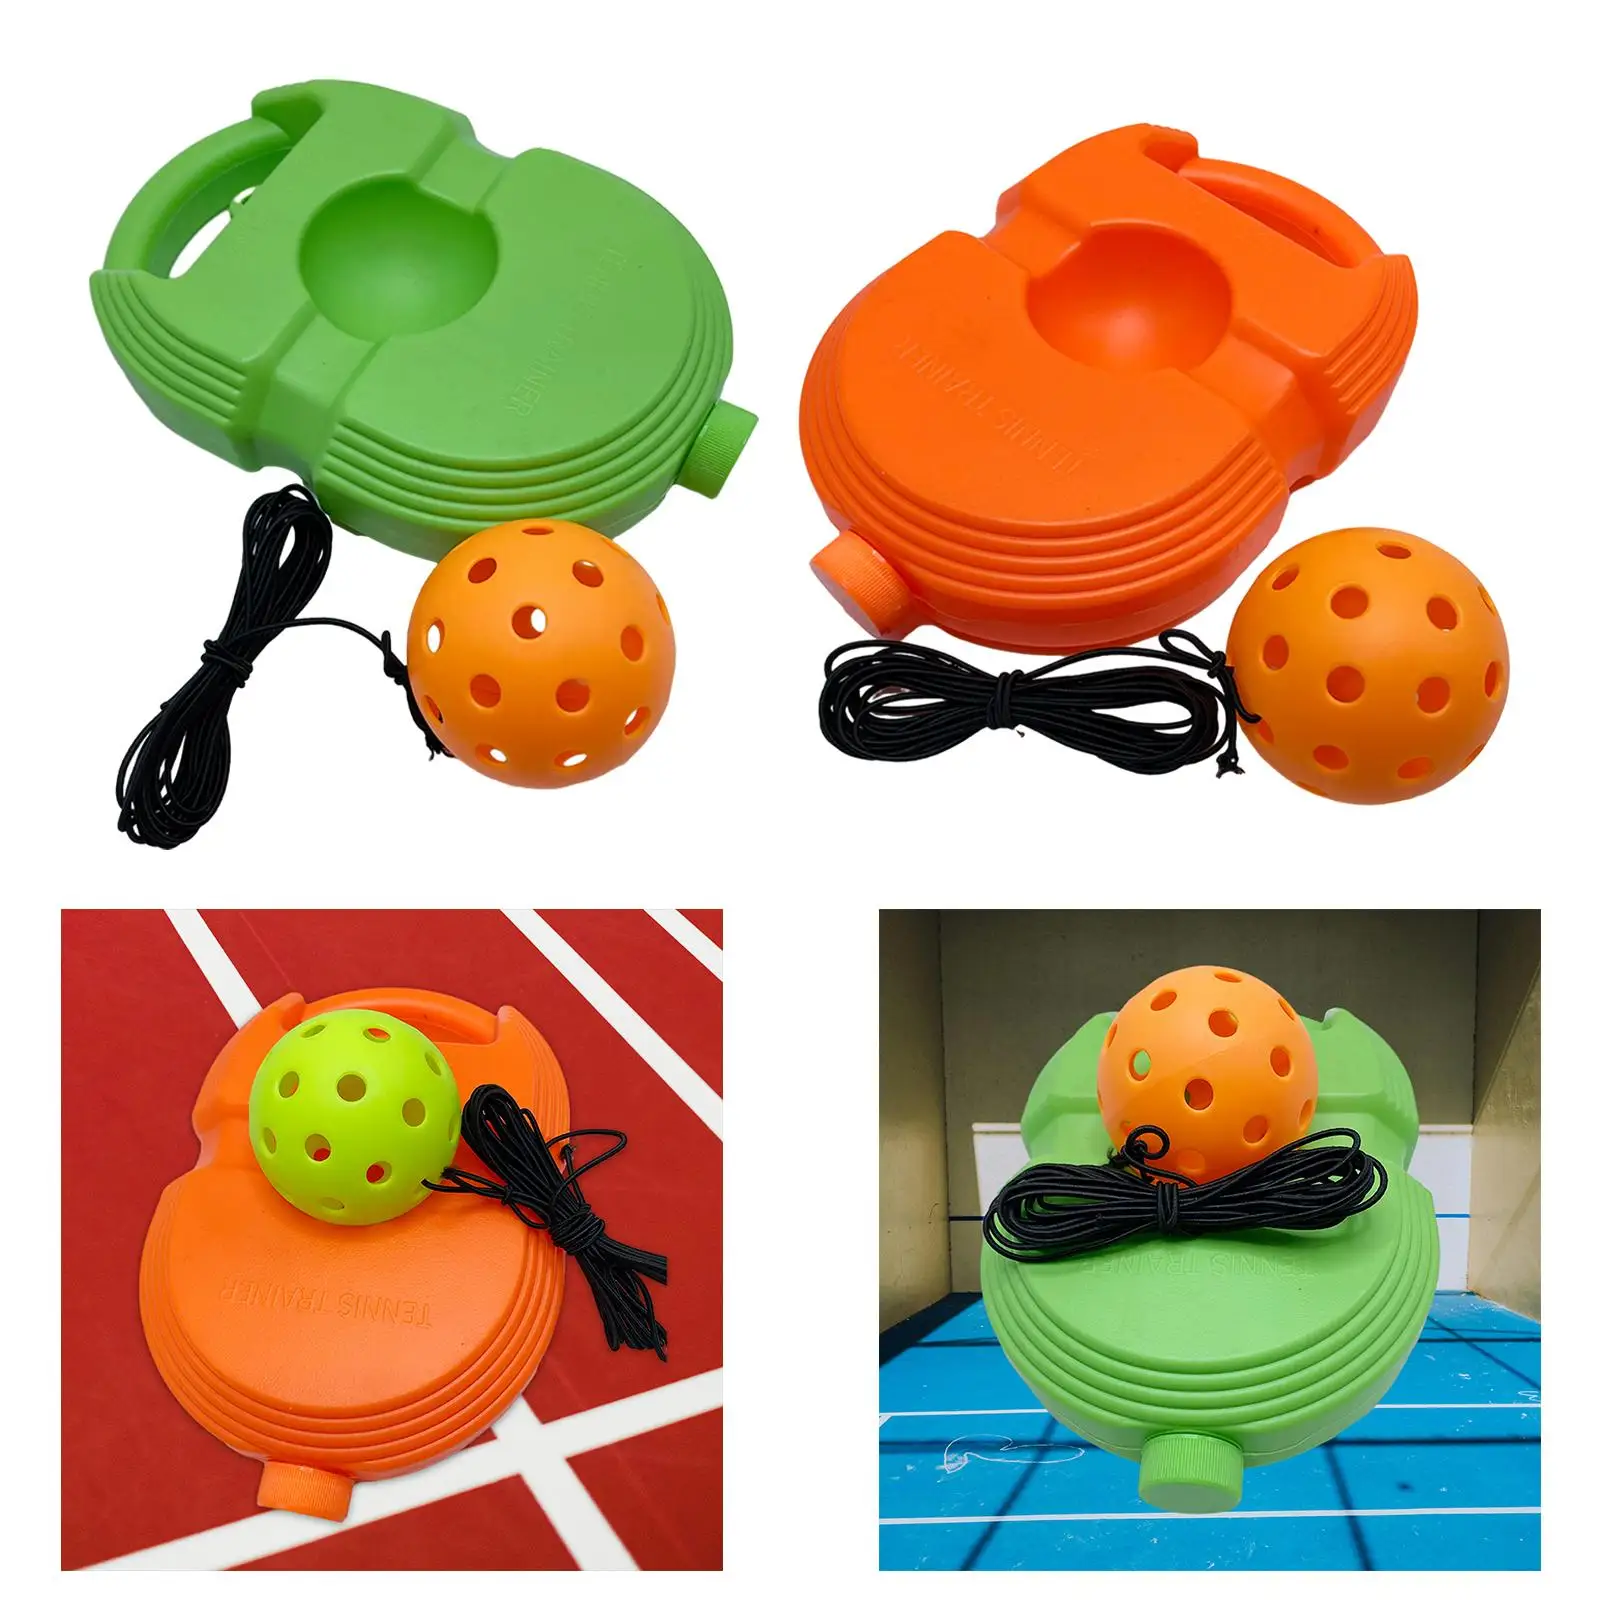 Solo Tennis Training Professional with Handle Baseboard Enhances Skills with Elastic Rope Ball Tennis Trainer for Outdoor Sports